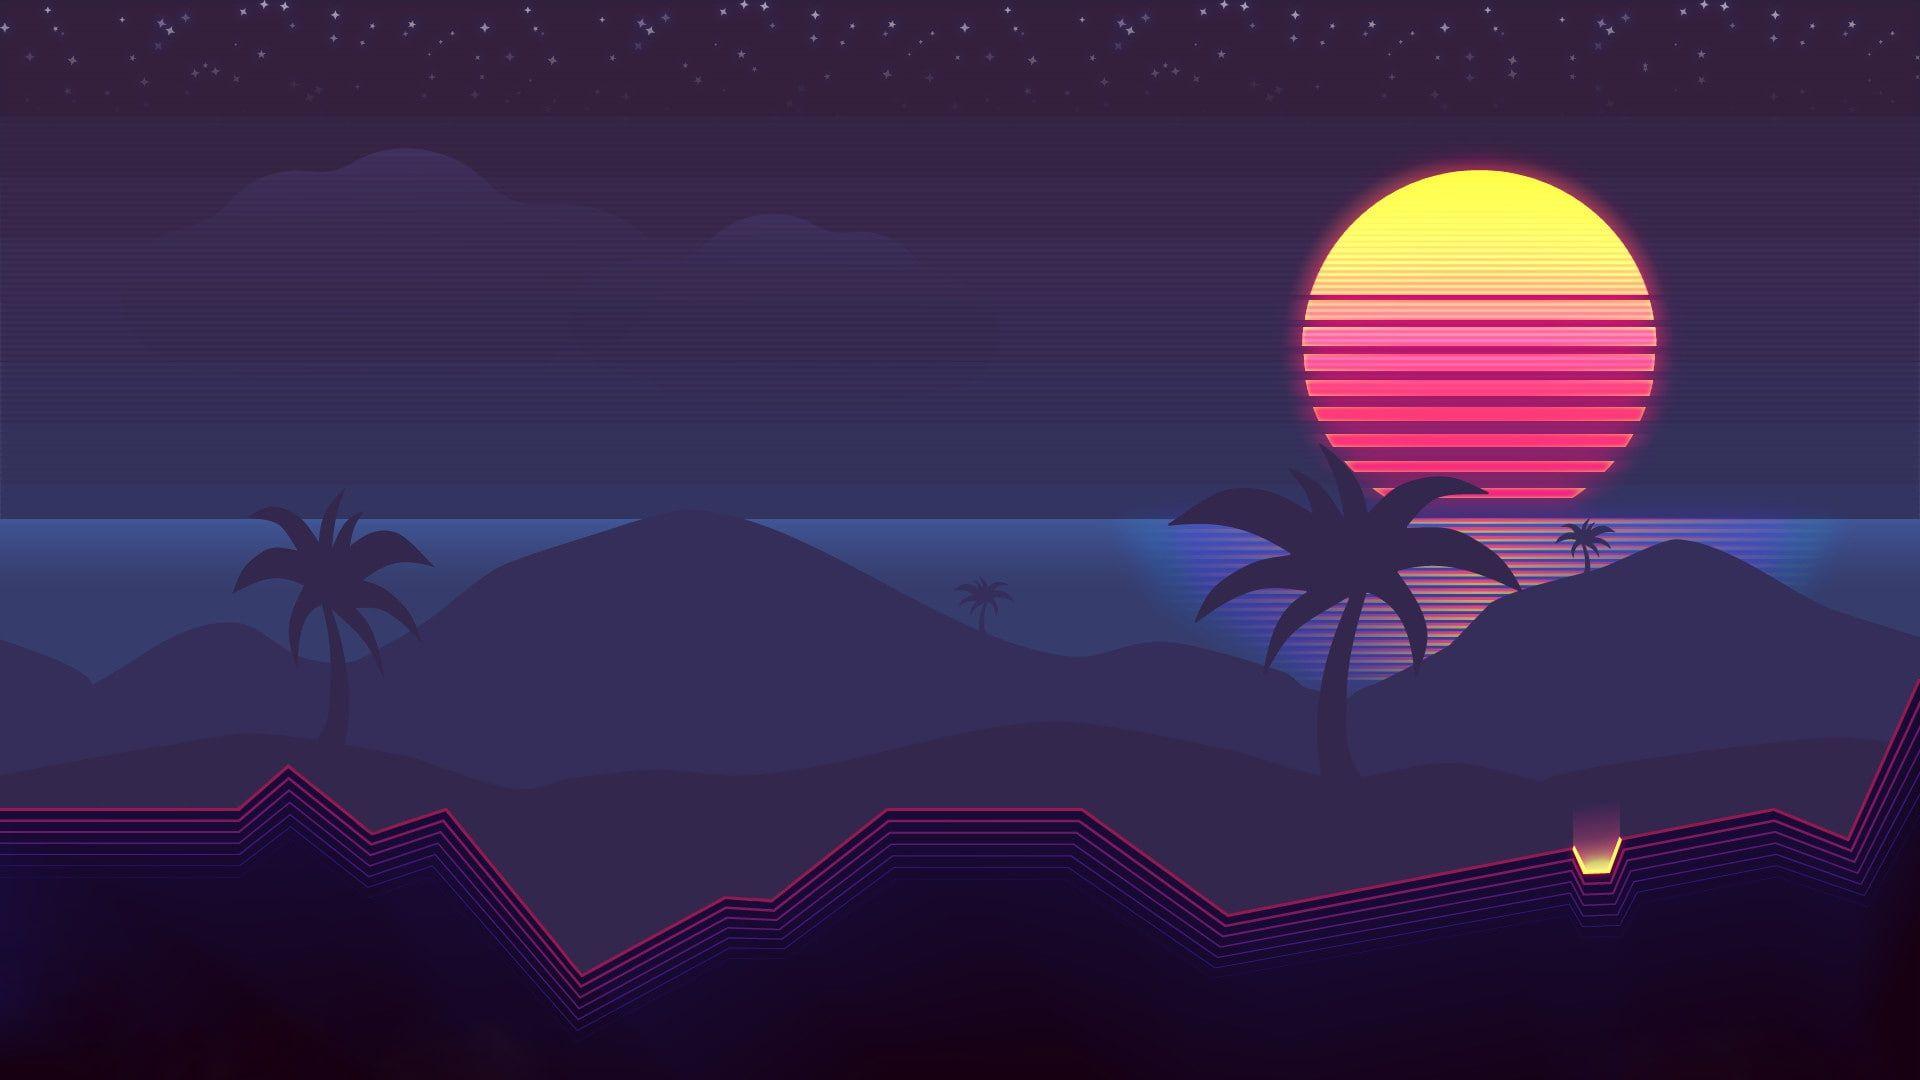 The sun #Music Palm trees #Background s #Neon 's #Synth